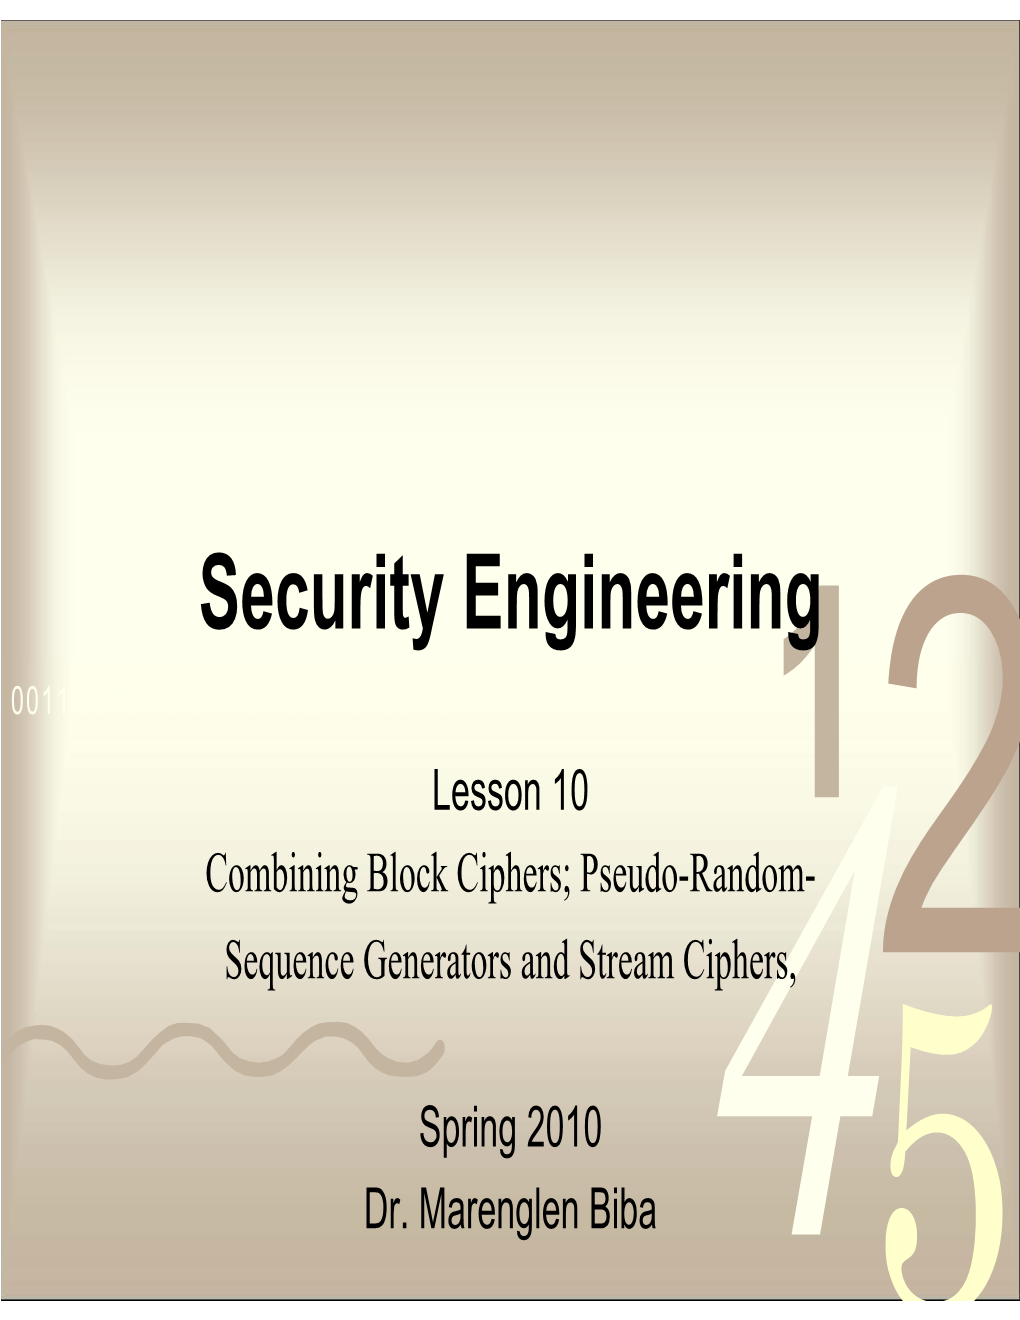 Security Engineering 0011 0010 1010 1101 0001 0100 1011 Lesson 10 Combining Block Ciphers; Pseudo-Random- Sequence Generators and Stream Ciphers